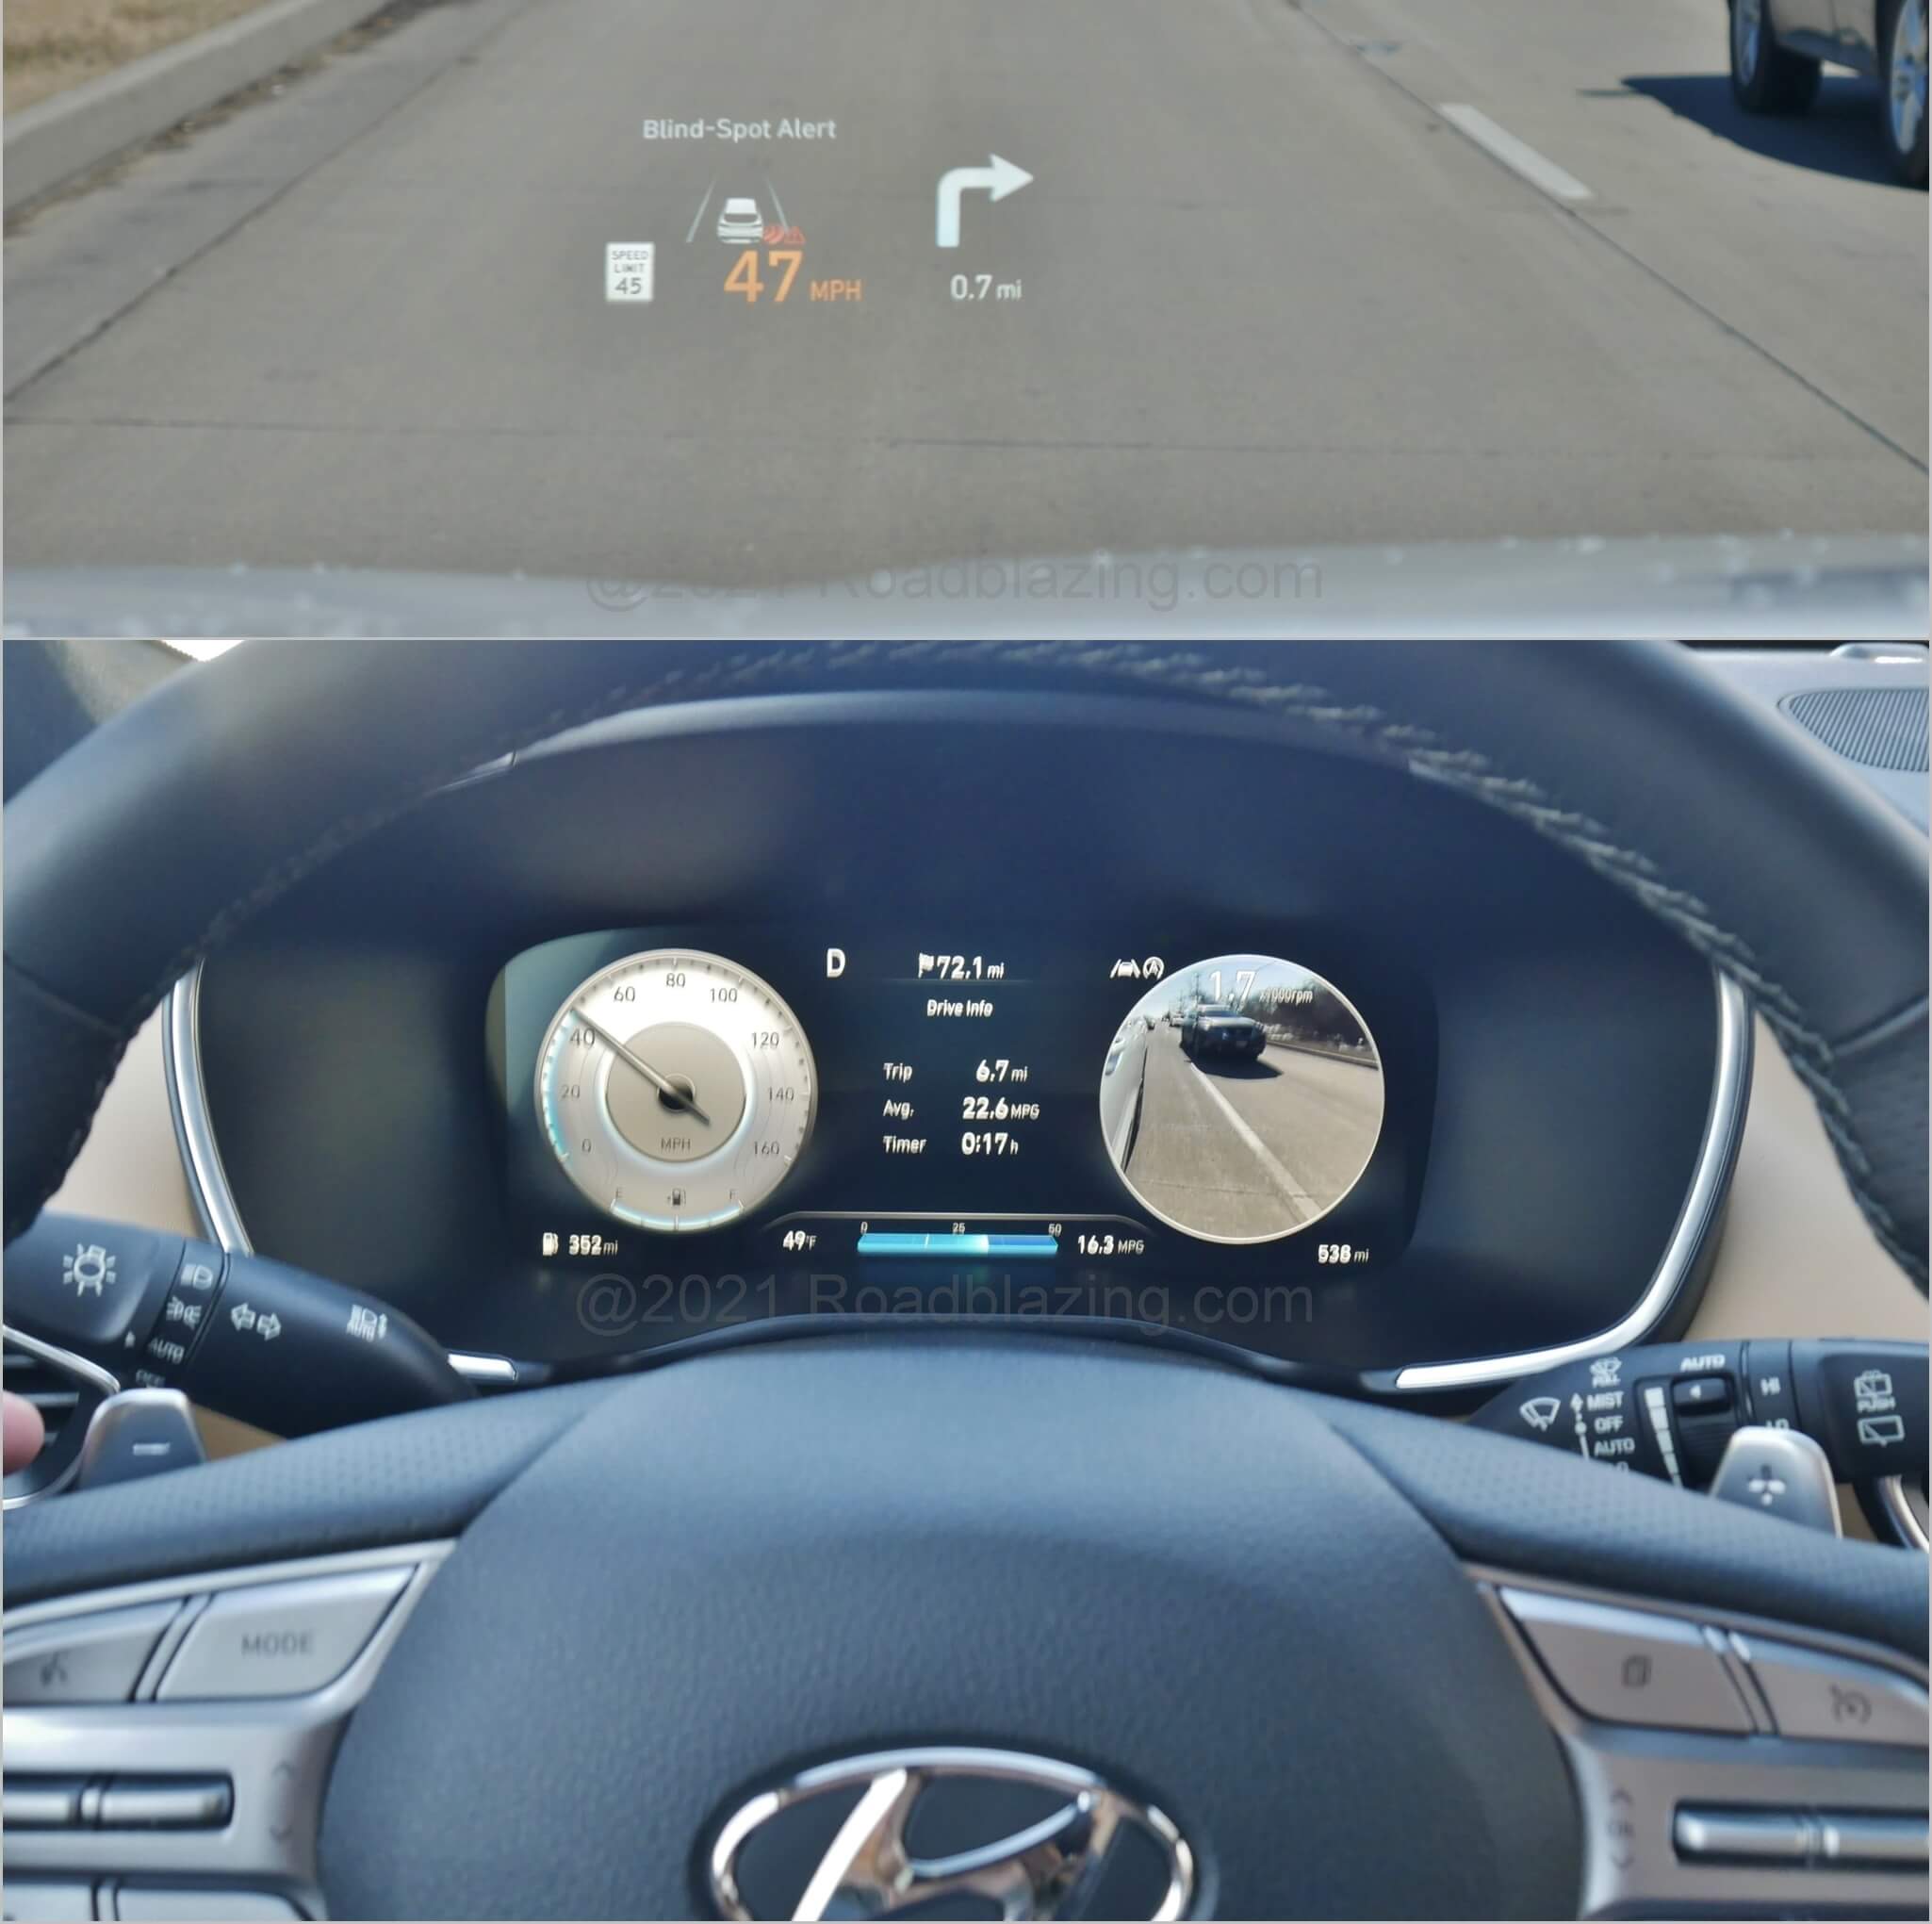 2021 Hyundai Santa Fe 2.5T Calligraphy AWD: dual gauges in TFT cluster can be switched to display adjacent lane cameras when signaled